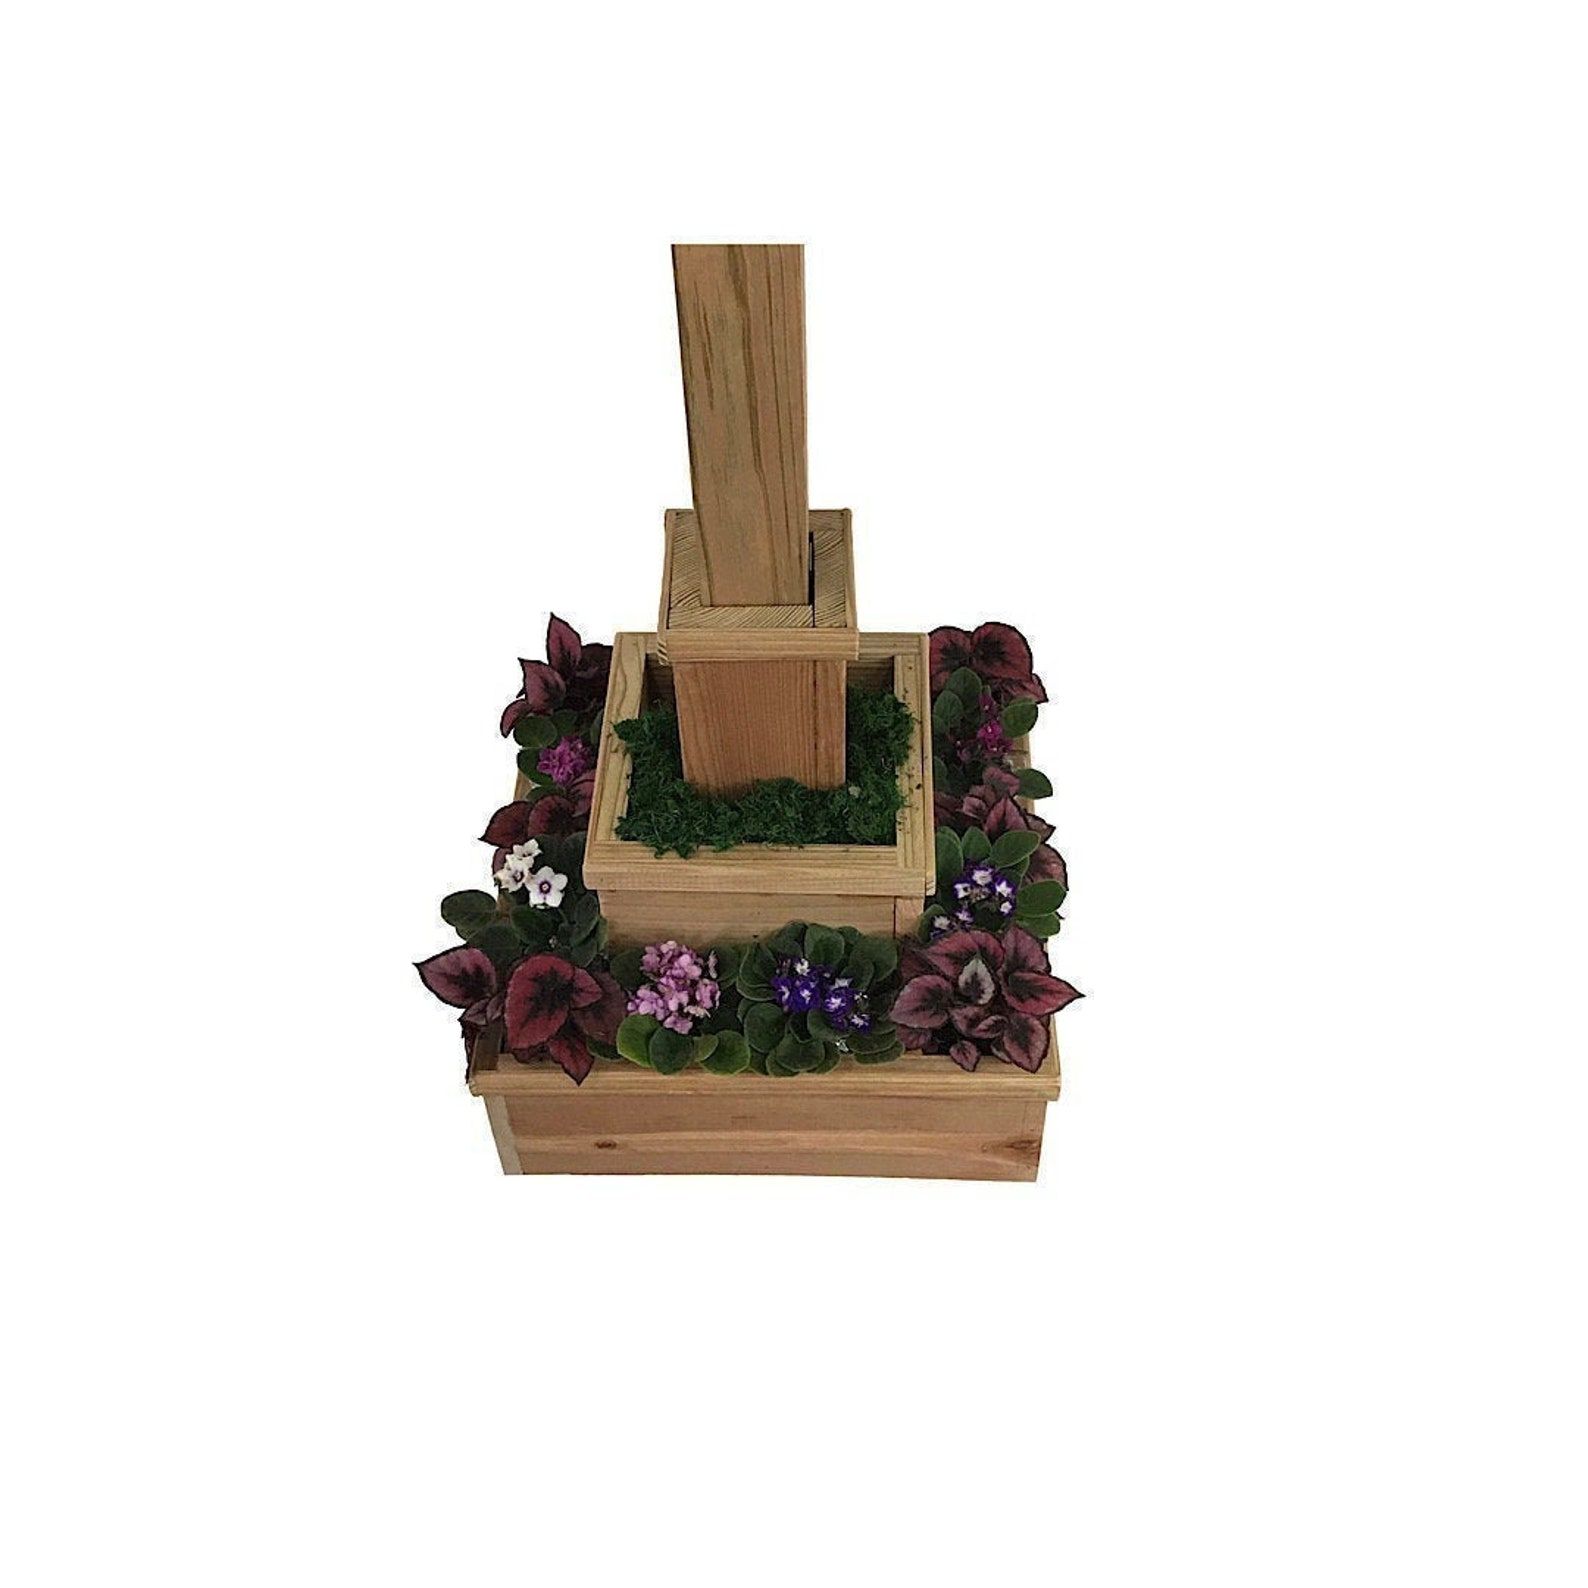 Wooden post for LFL with square garden boxes built into the base.